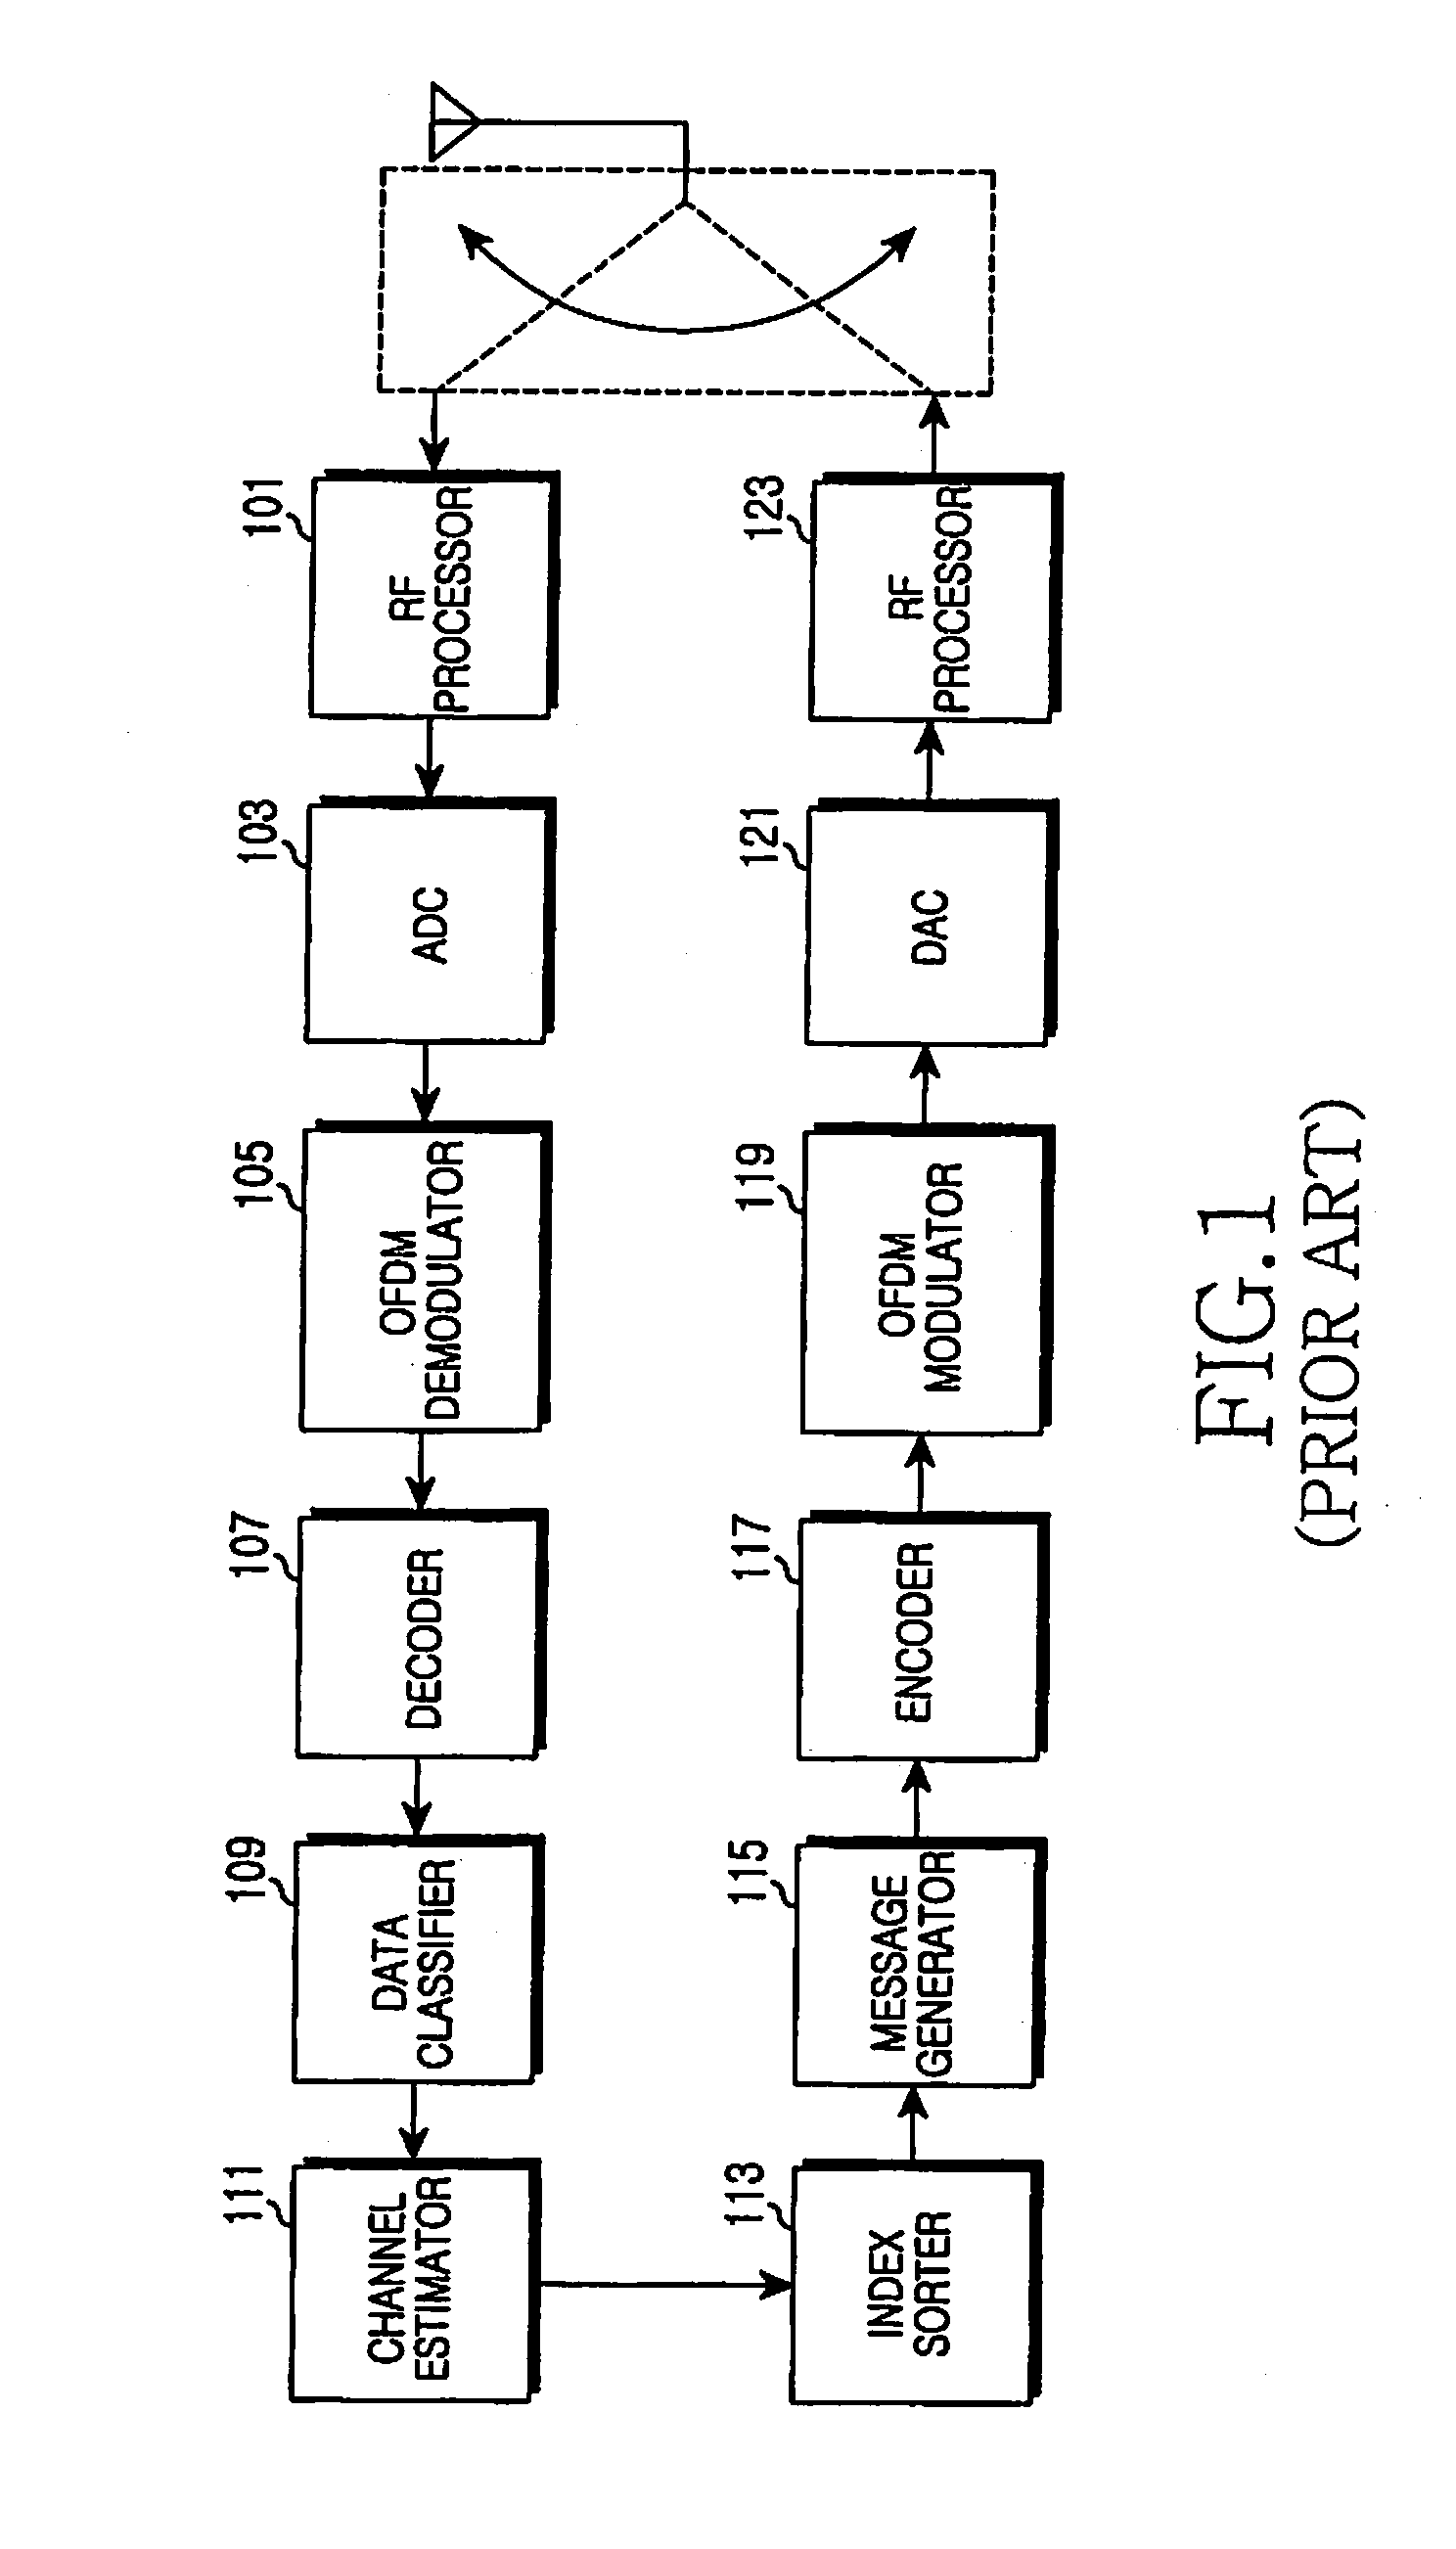 Apparatus and method for selecting relay station in broadband wireless communication system